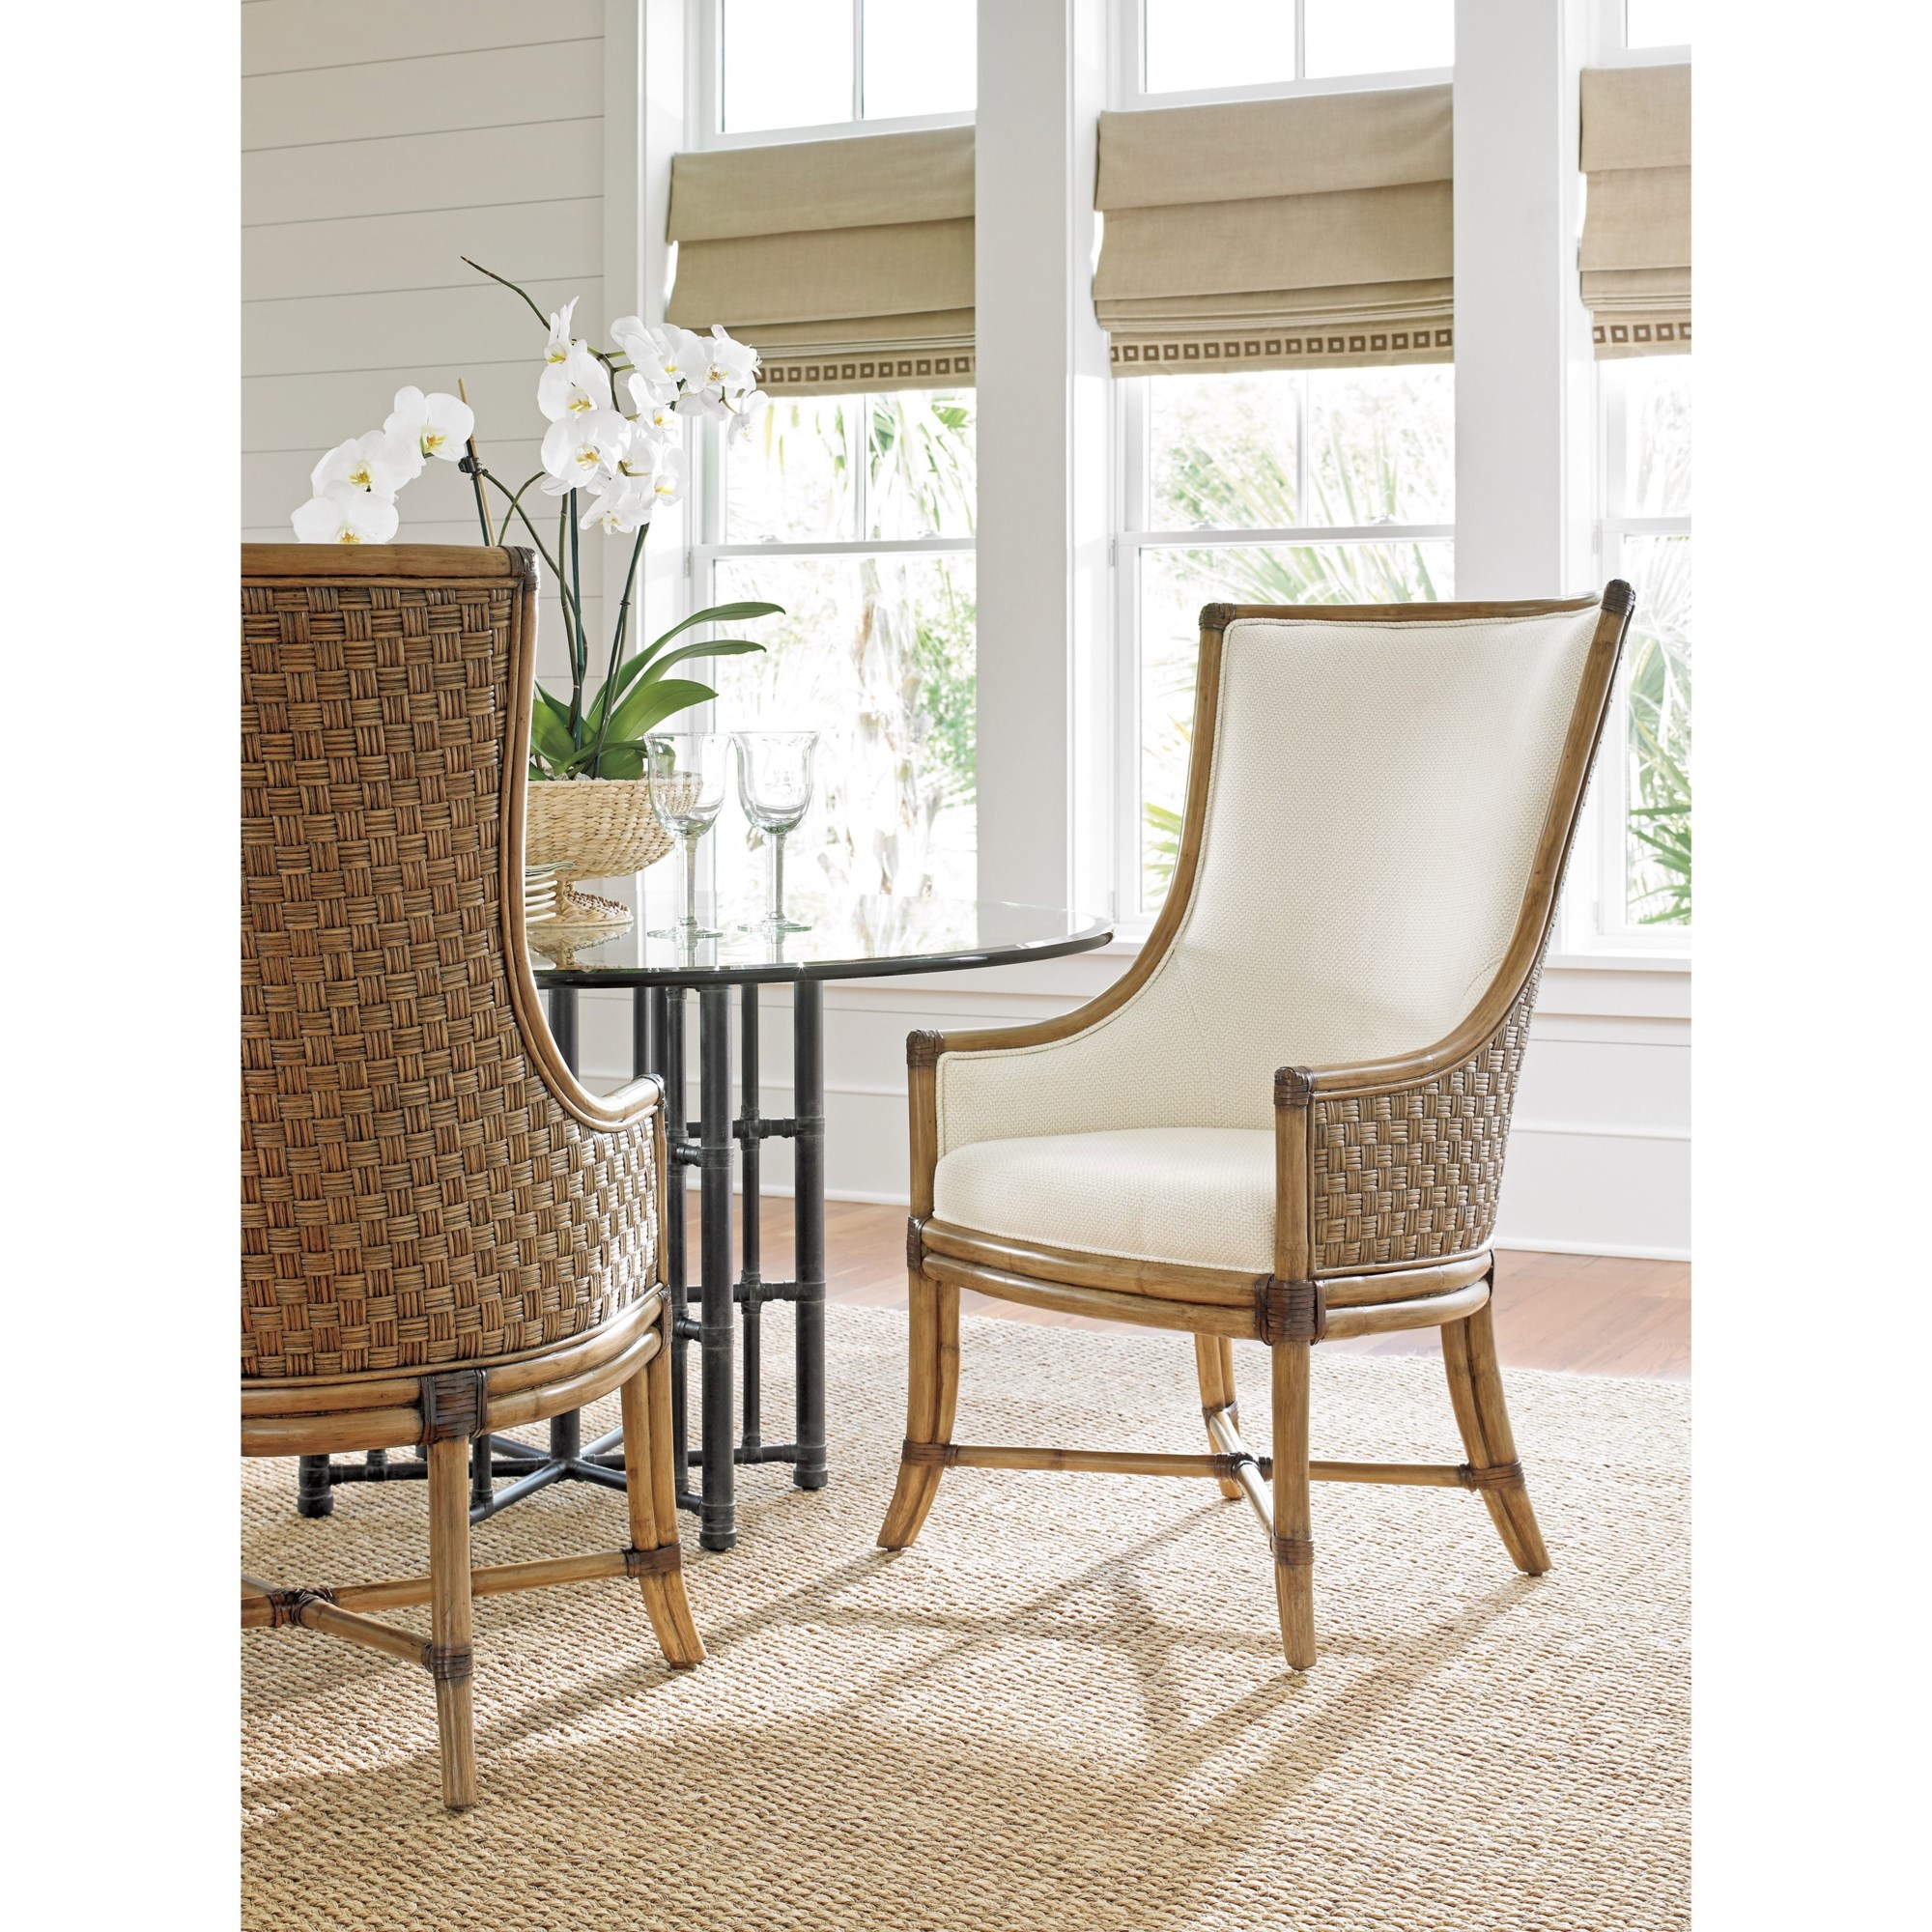 Tommy Bahama Home Twin Dollar Fabric | Sand Rattan 558-885-01 | Furniture Ivory Belfort Chair Dining Palms Host Chairs Woven Balfour Arm in